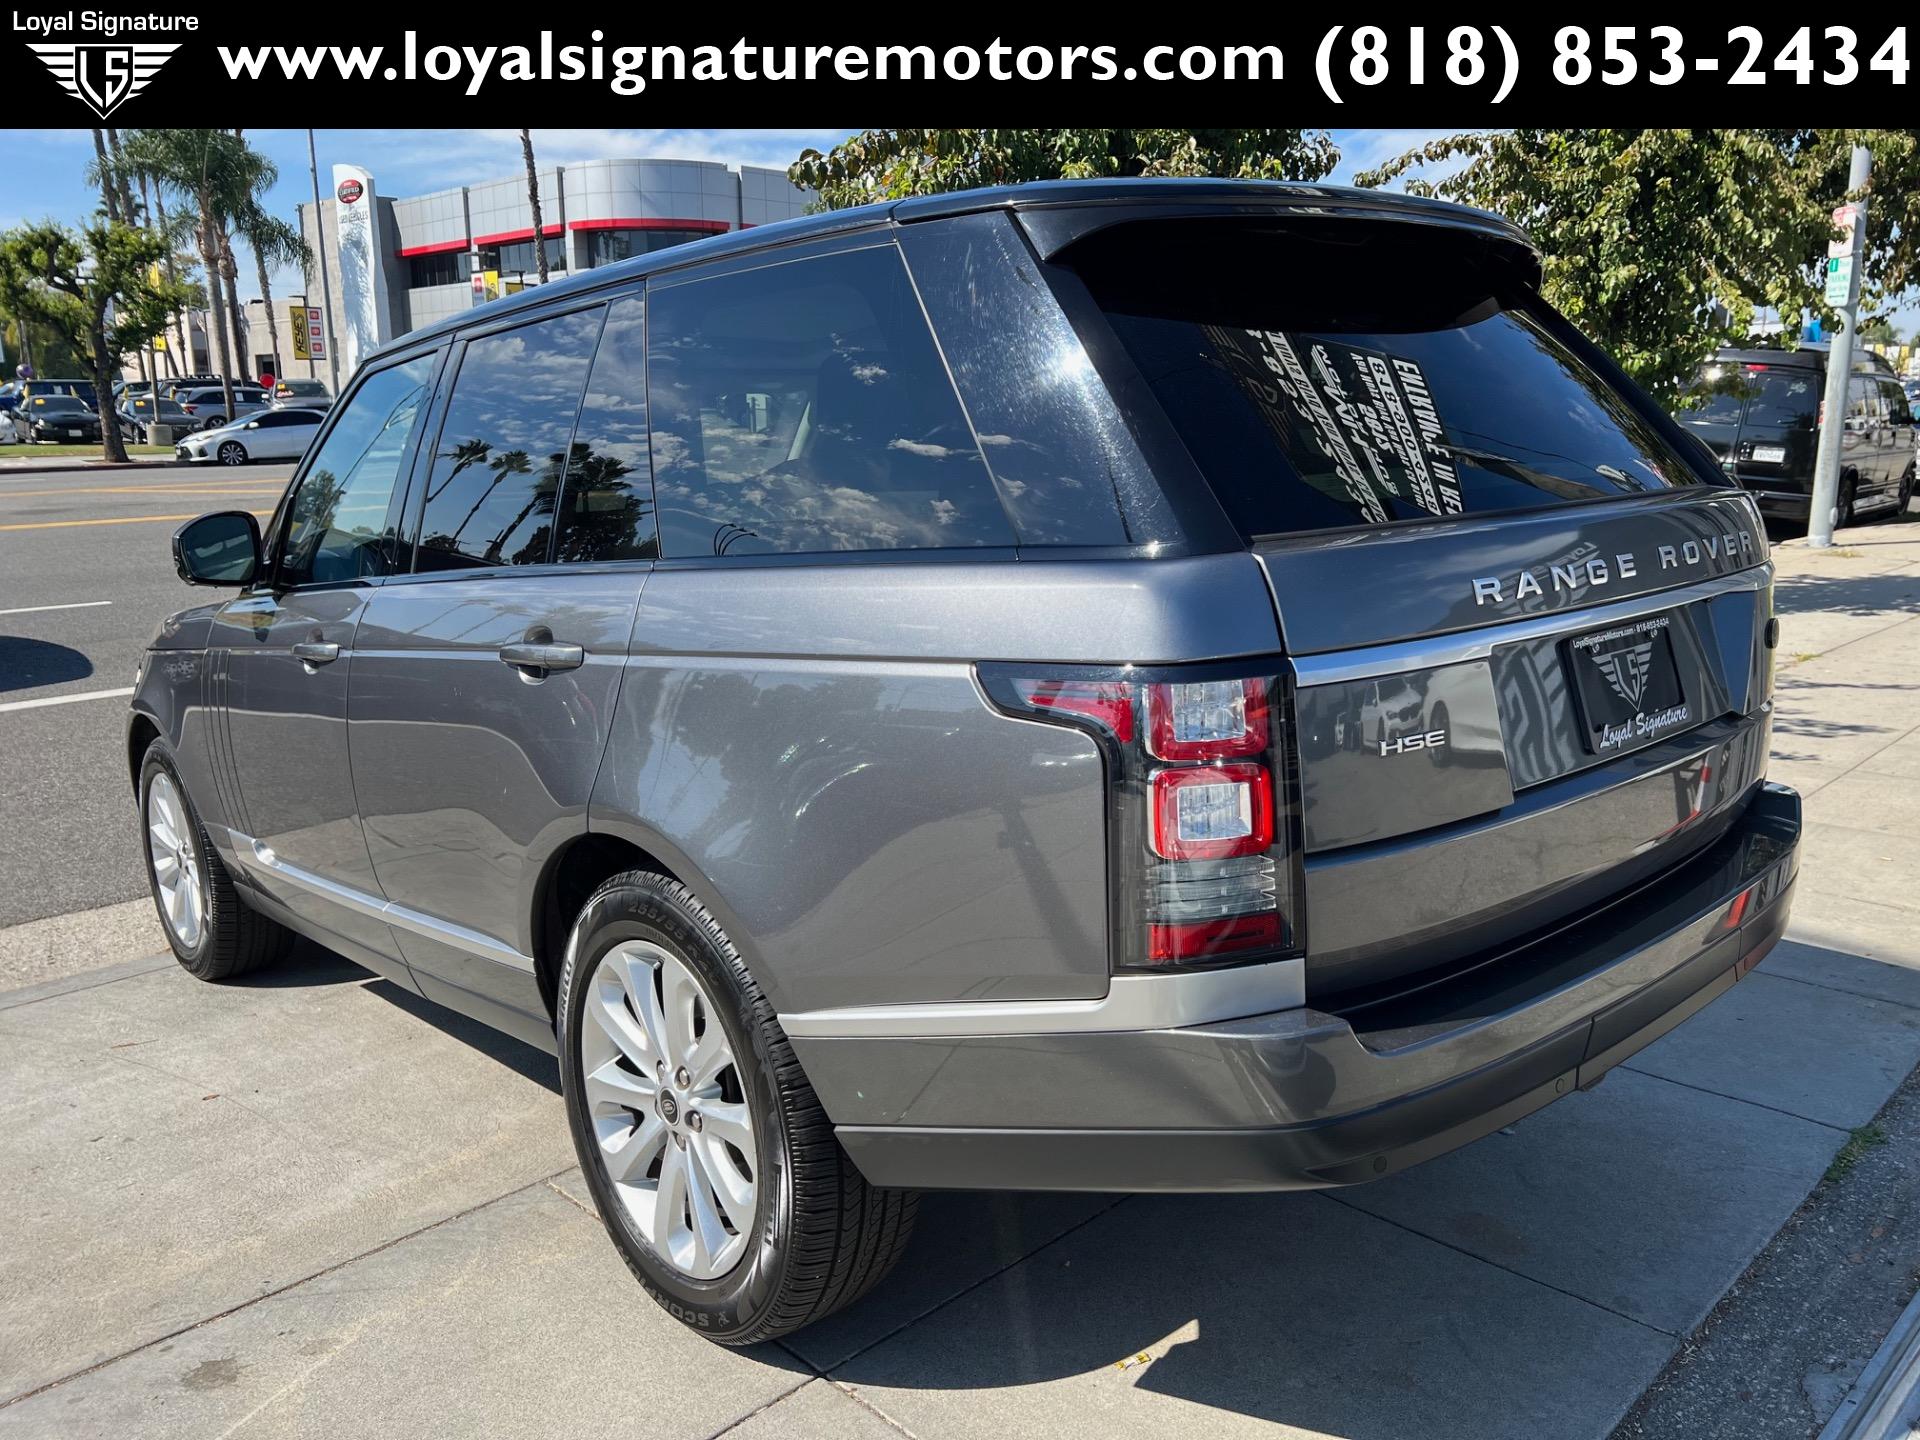 Used-2014-Land-Rover-Range-Rover-HSE